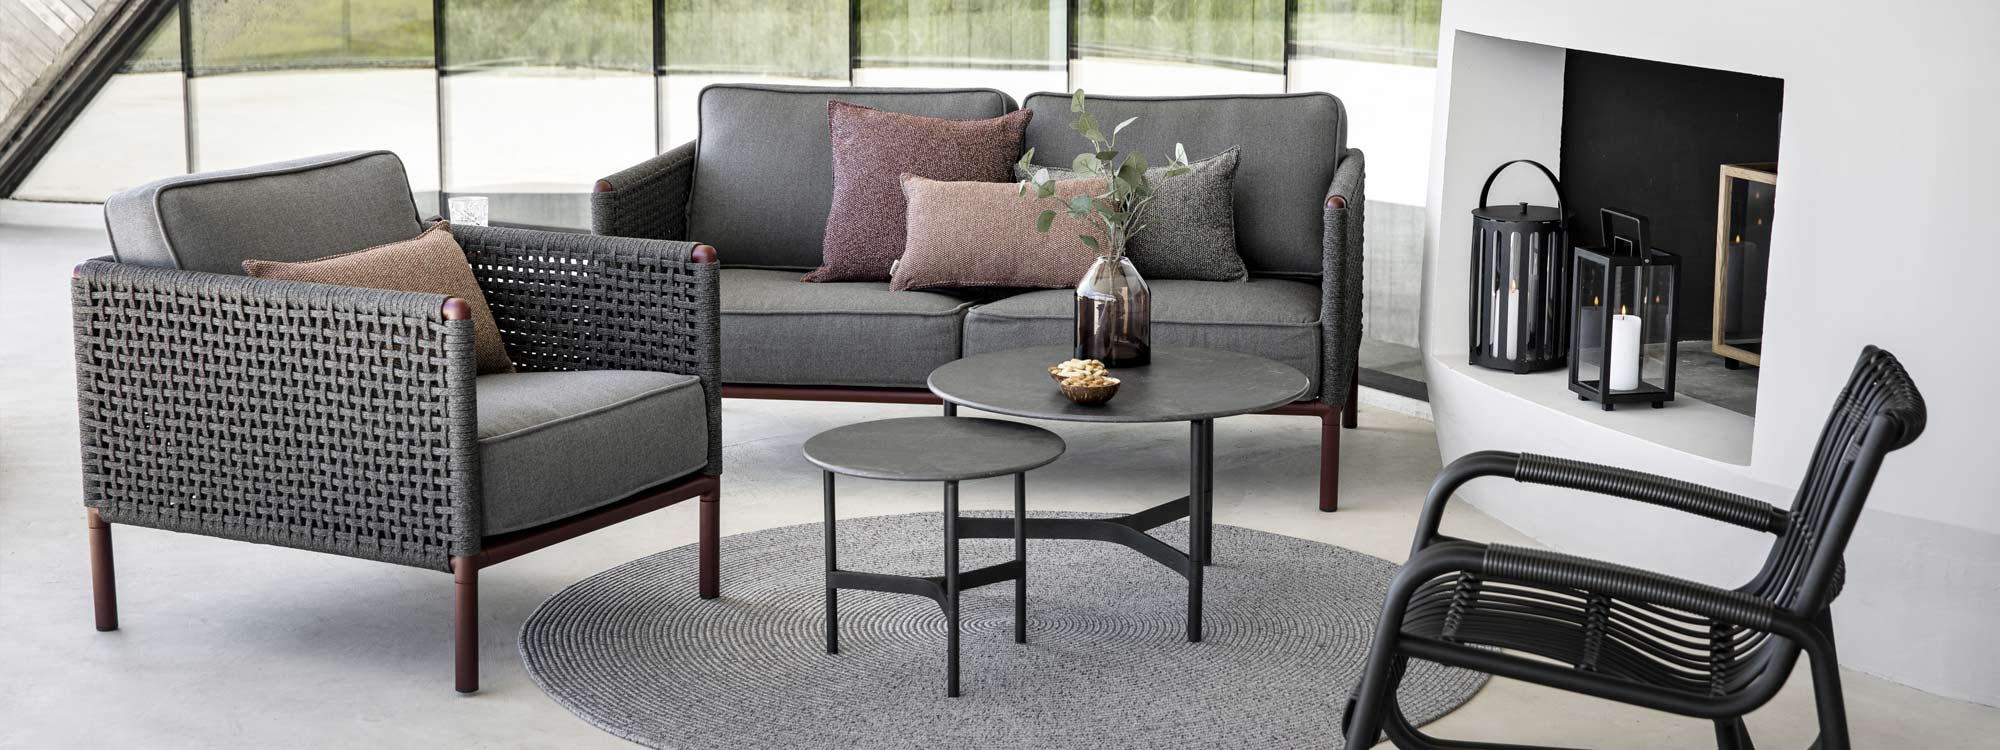 Image of dark grey and bordeaux Encore outdoor lounge furniture and nest of Twist round low tables by Cane-line